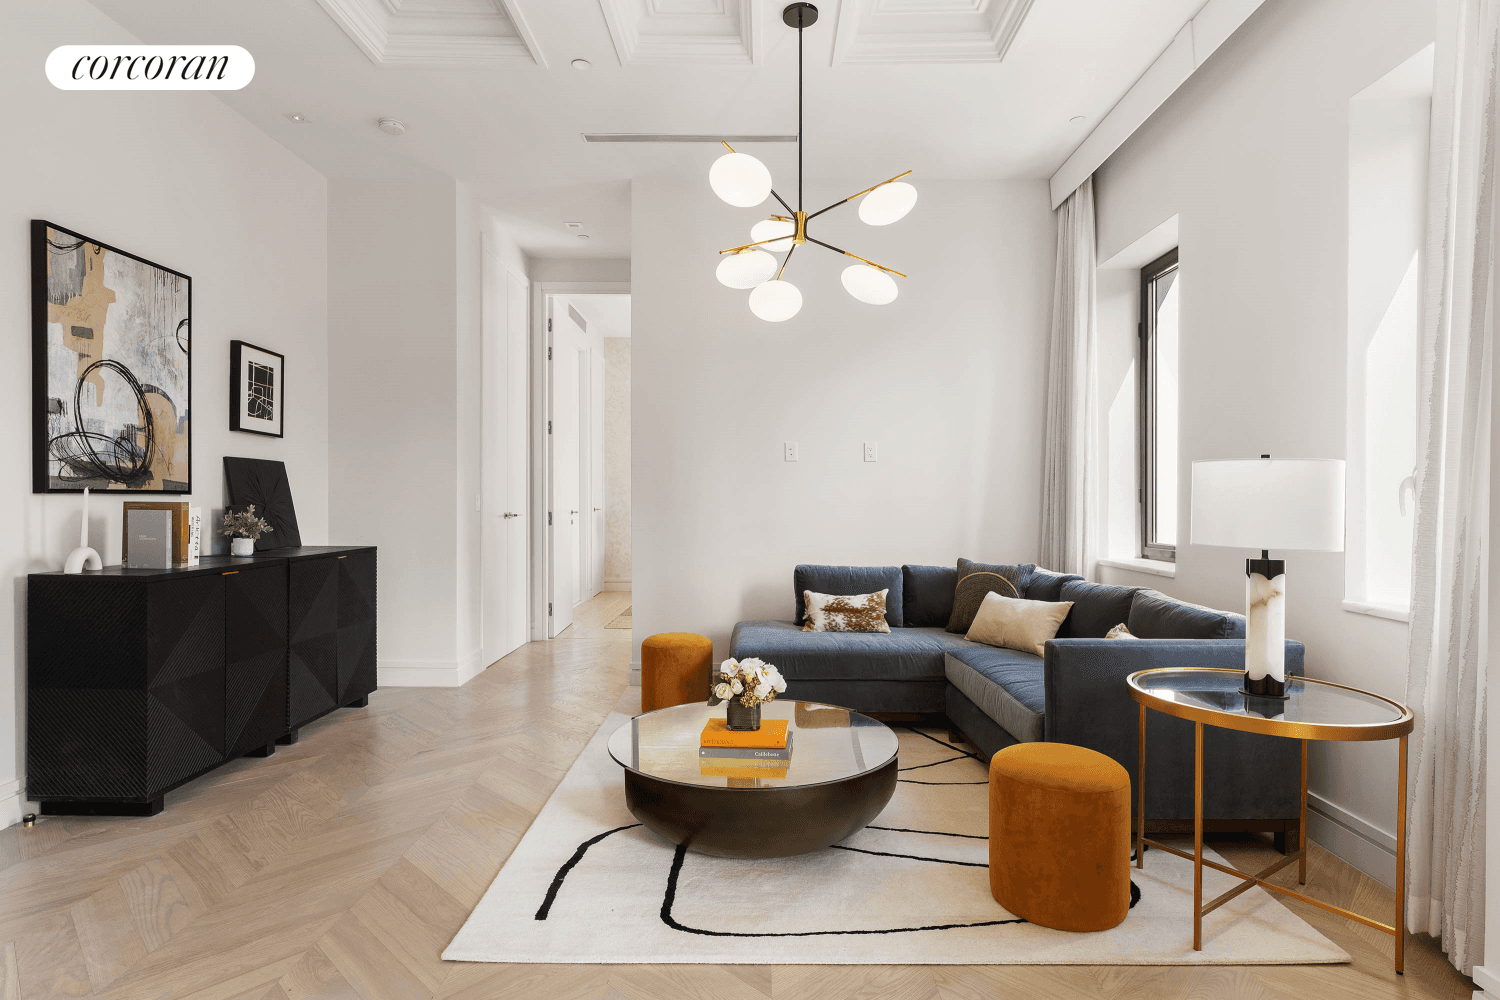 Archive Lofts, where Tribeca style living meets an East side address.